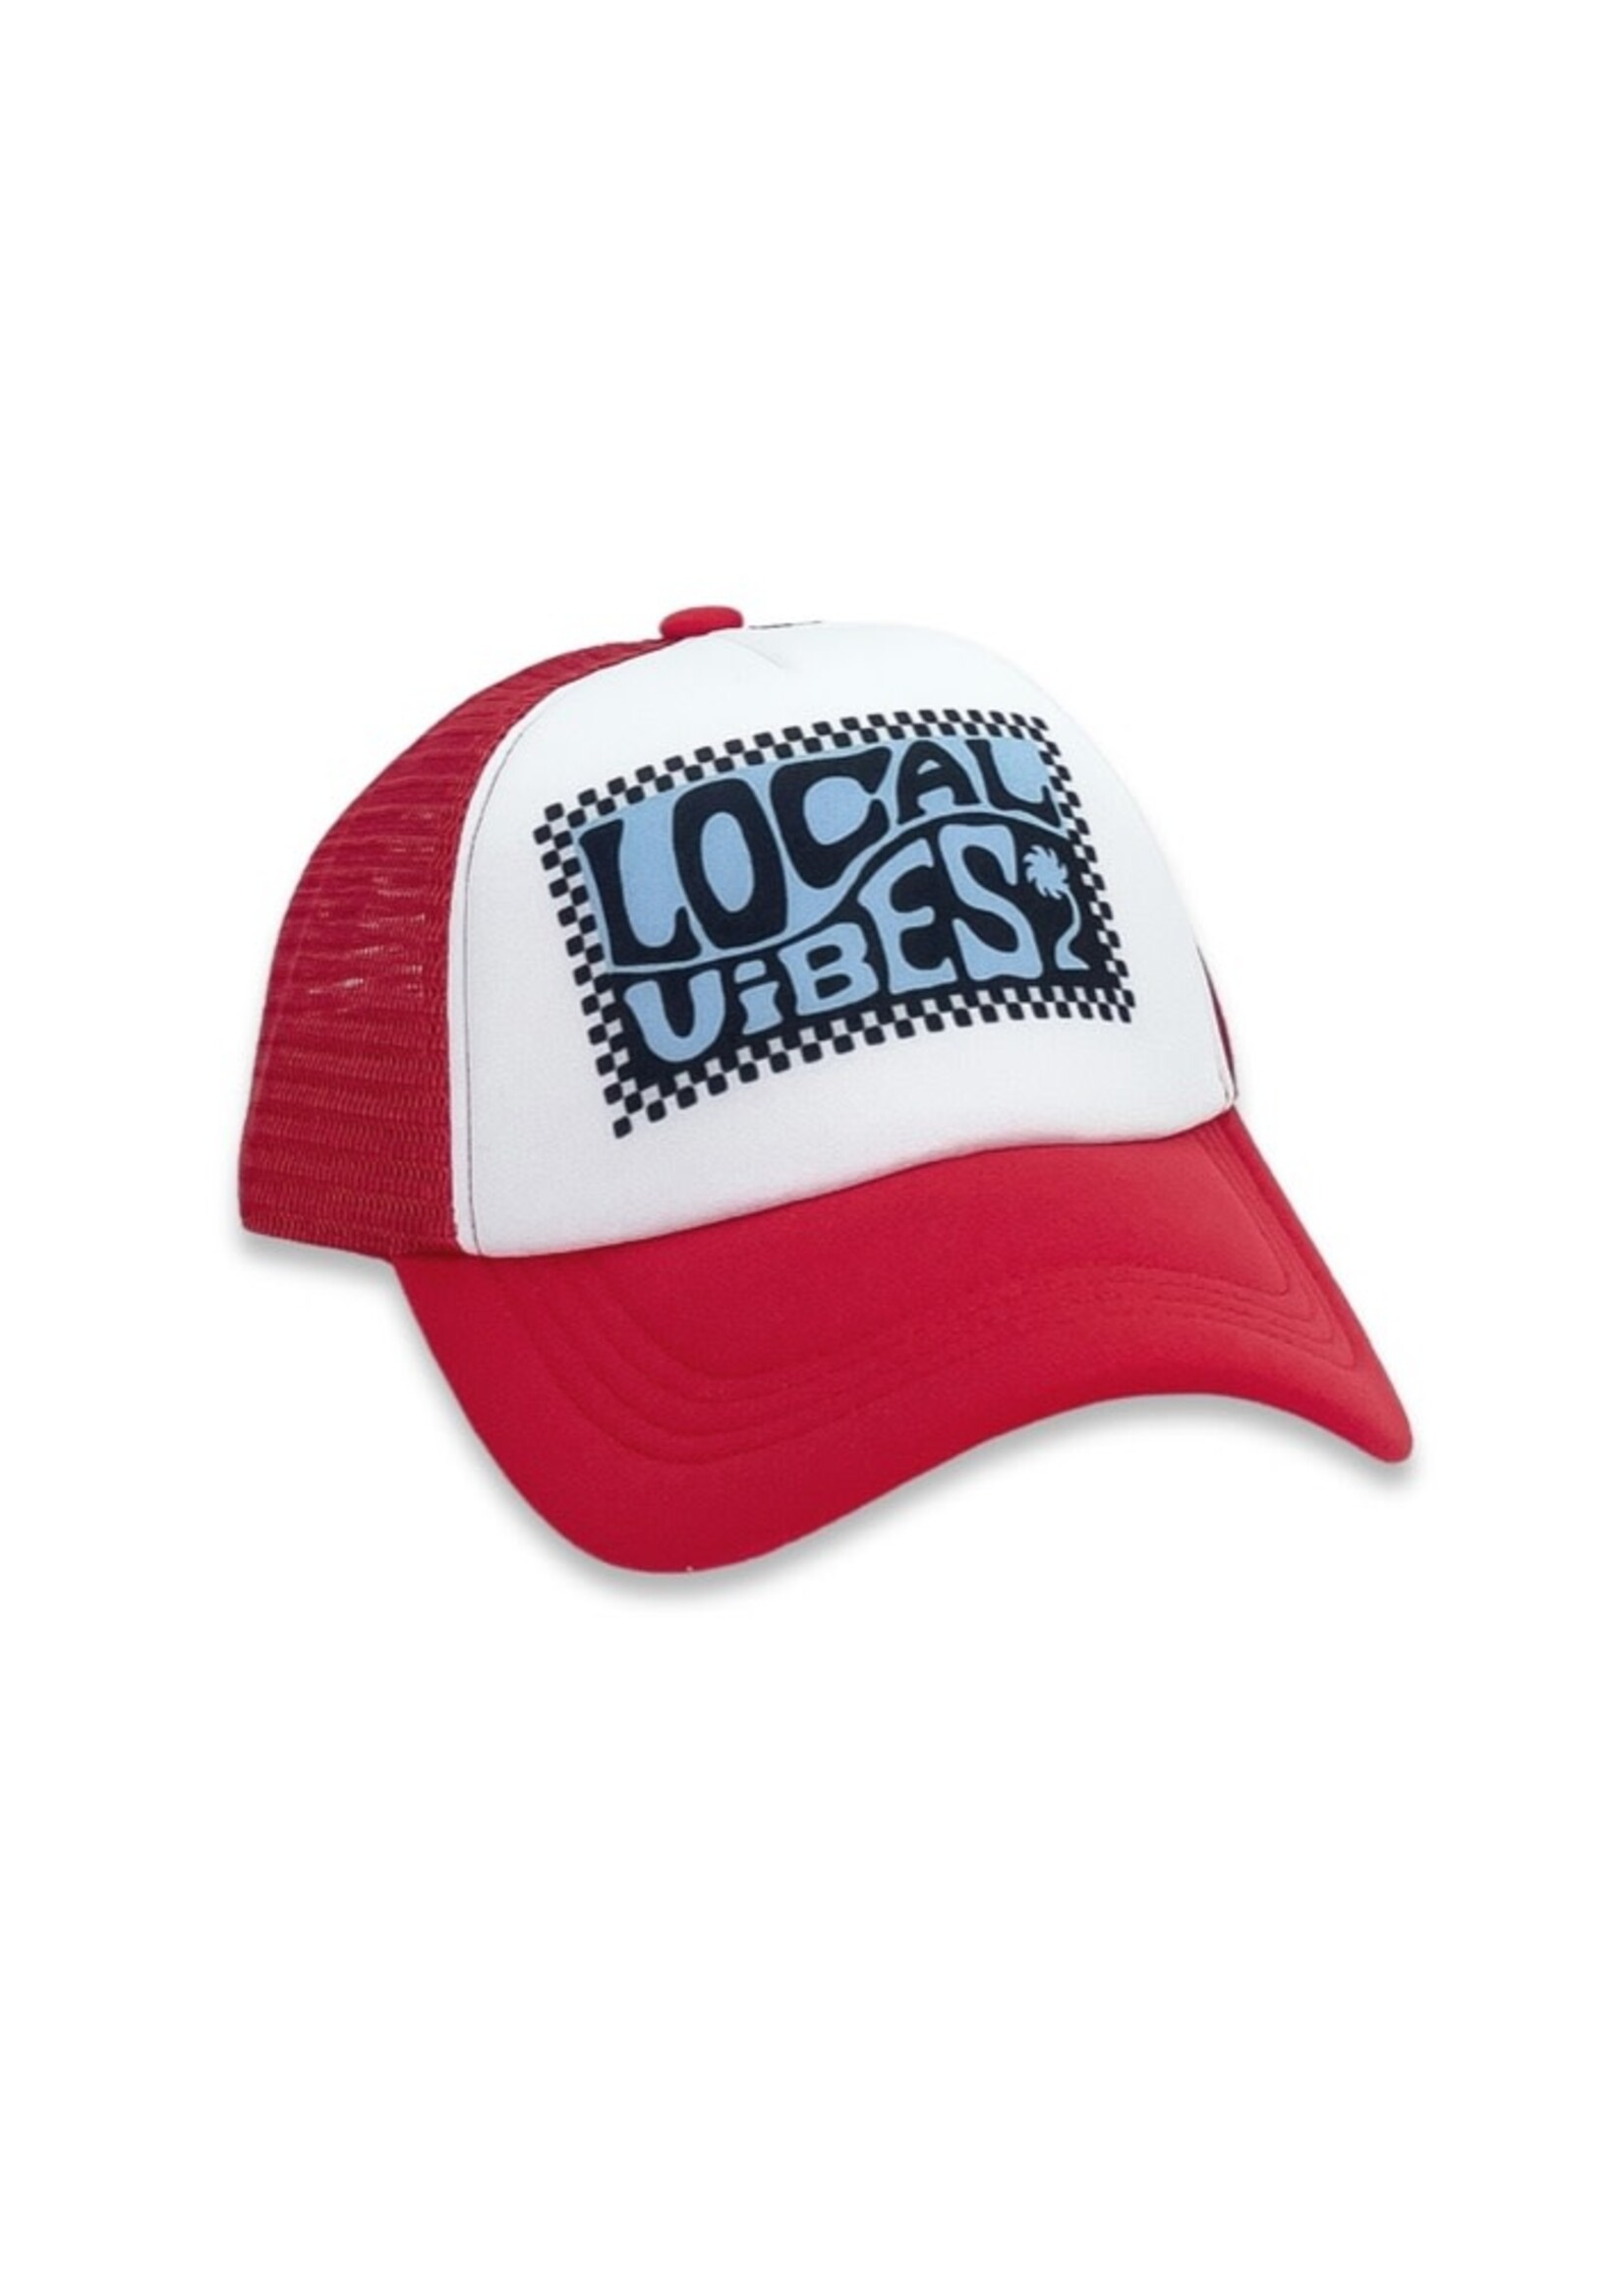 Feather 4 Arrow Feather 4 Arrow, Local Vibes Trucker Hat || Red and White